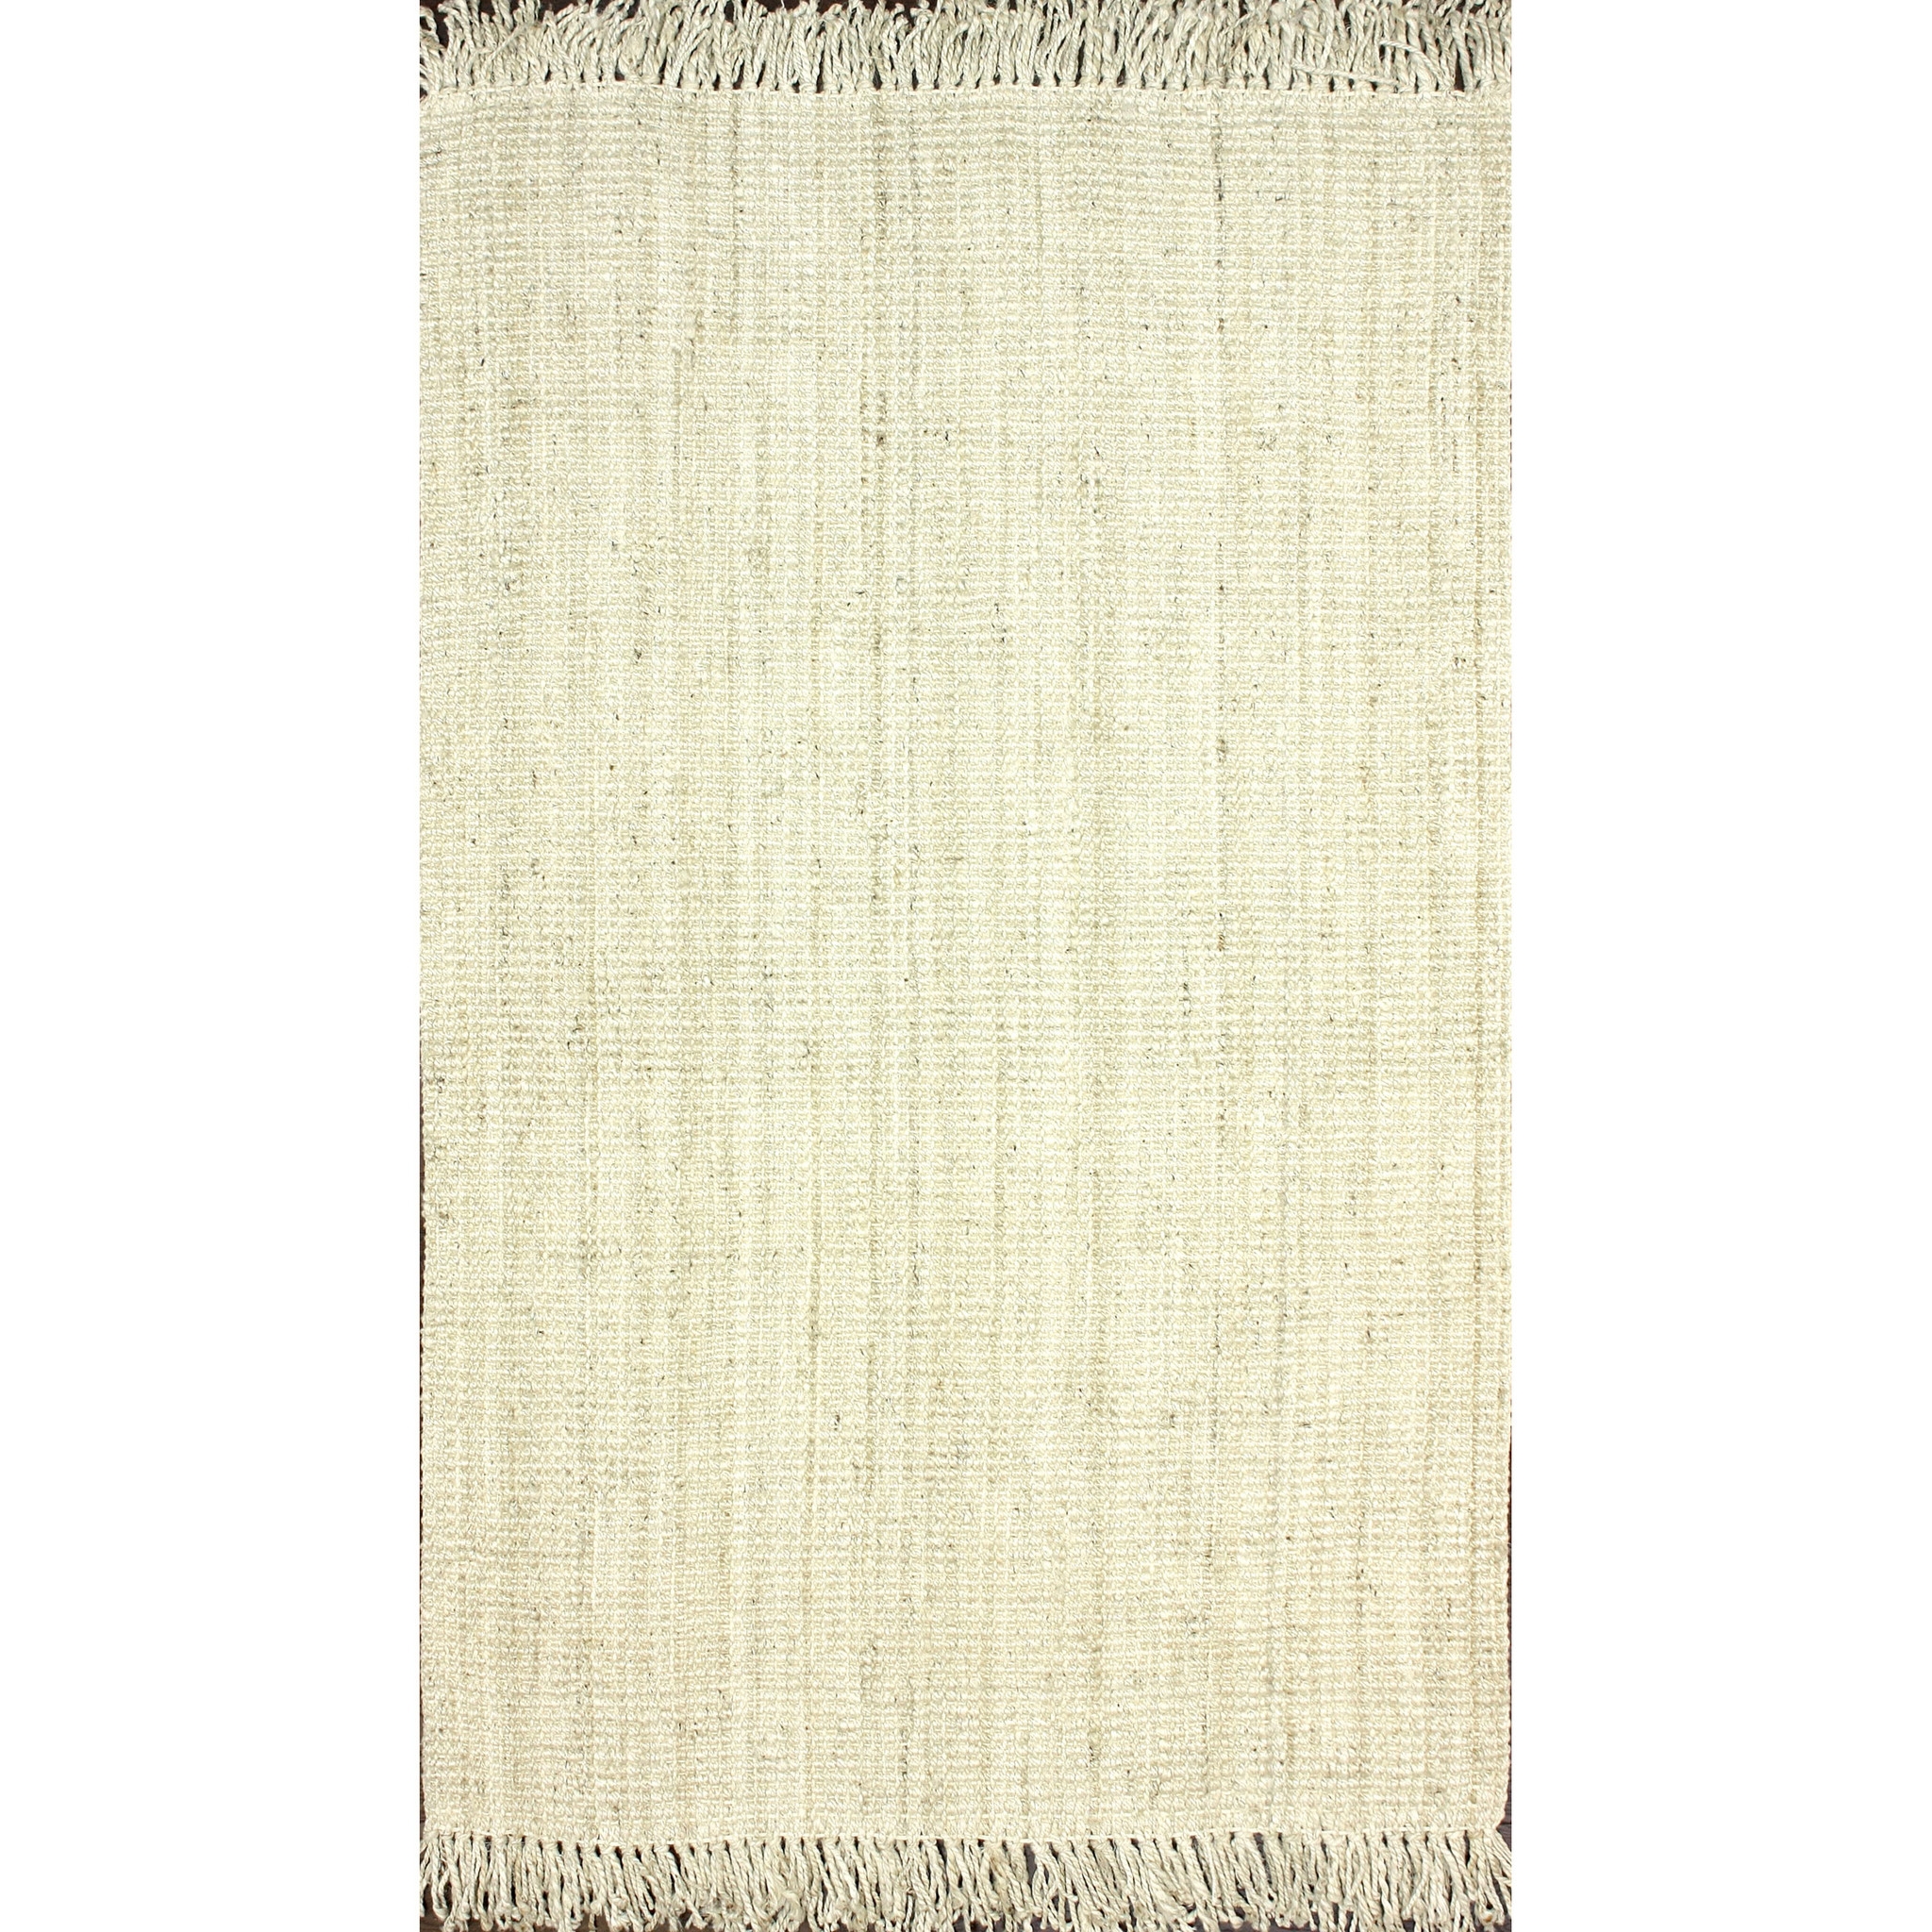 Hand Woven Chunky Loop Jute -7'6" x 9'6" OFF WHITE - Image 1